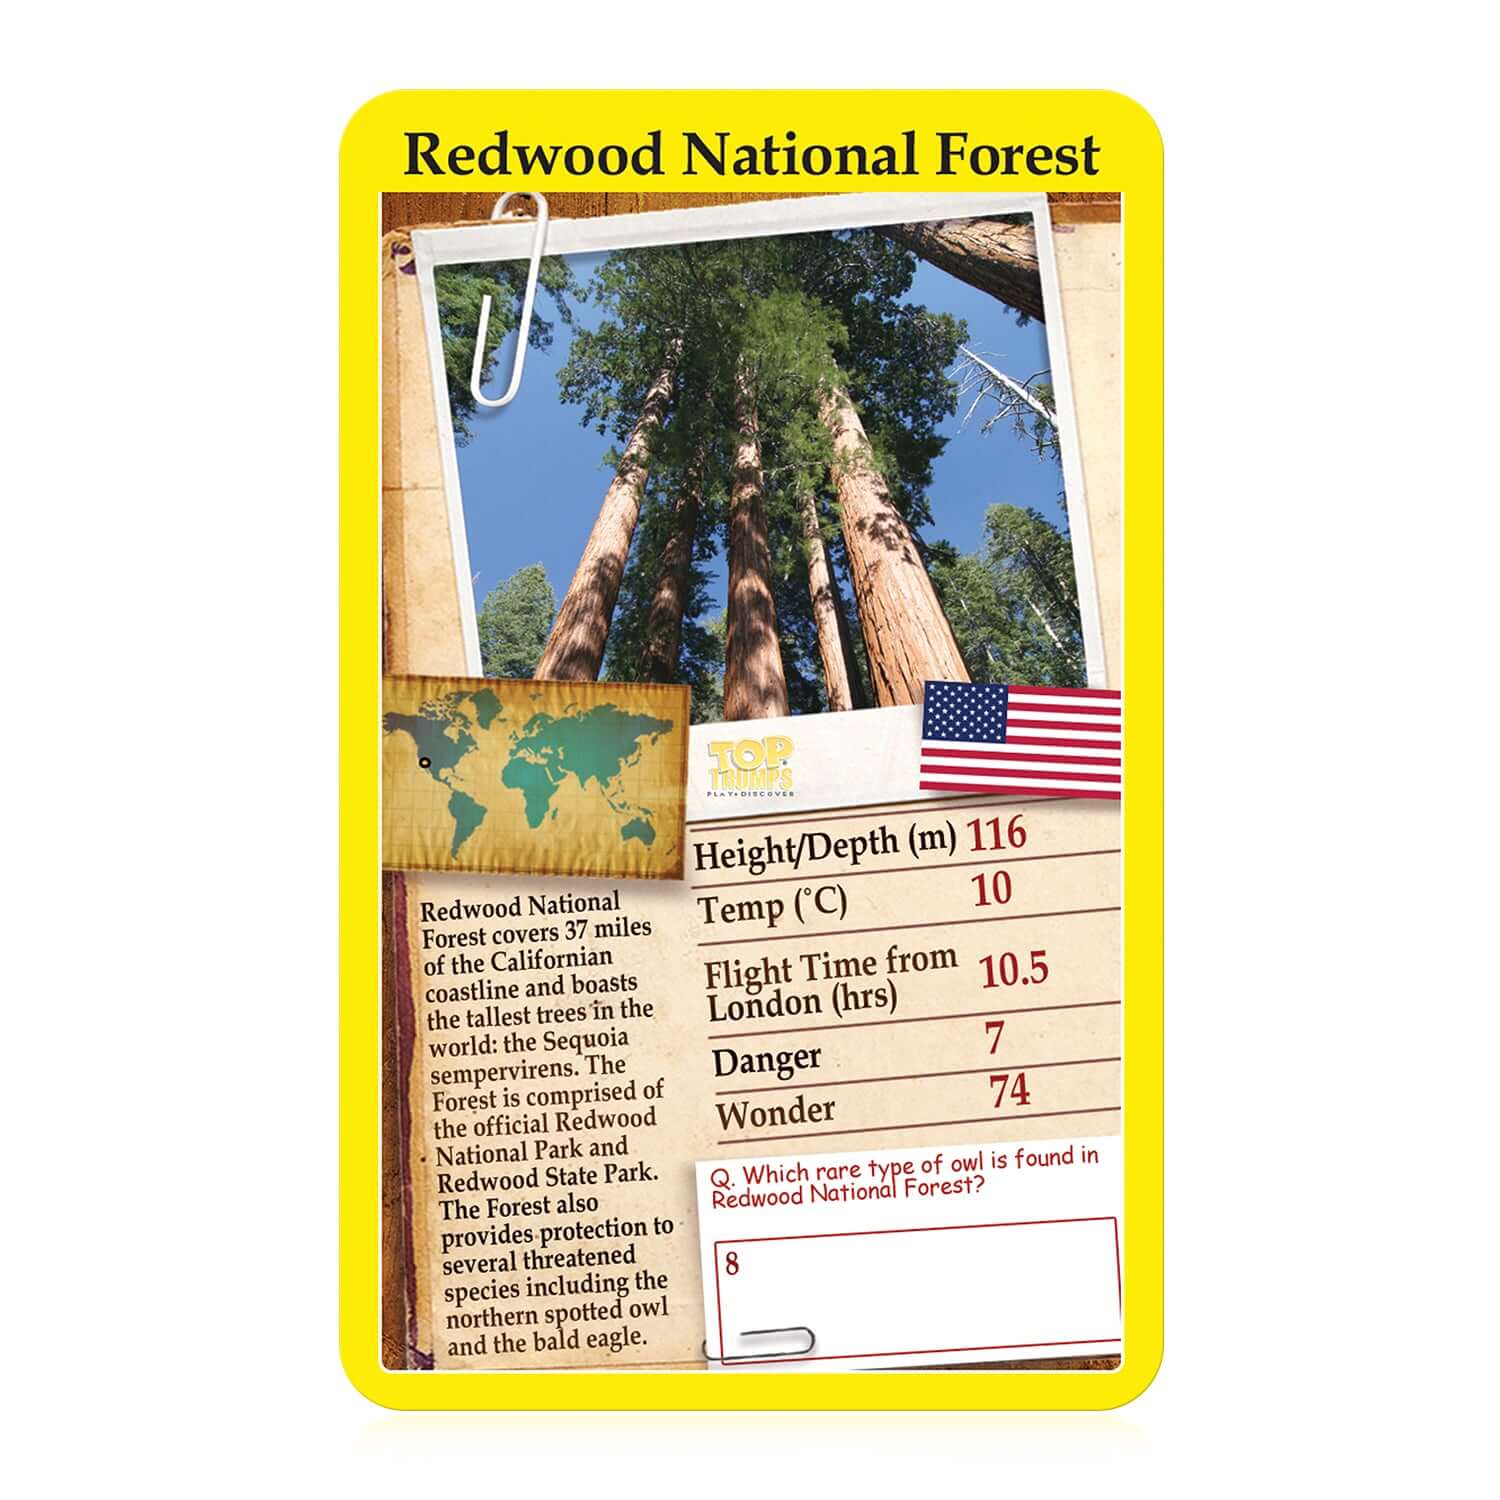 Top Trumps USA - Home of the World's Coolest Card Game!